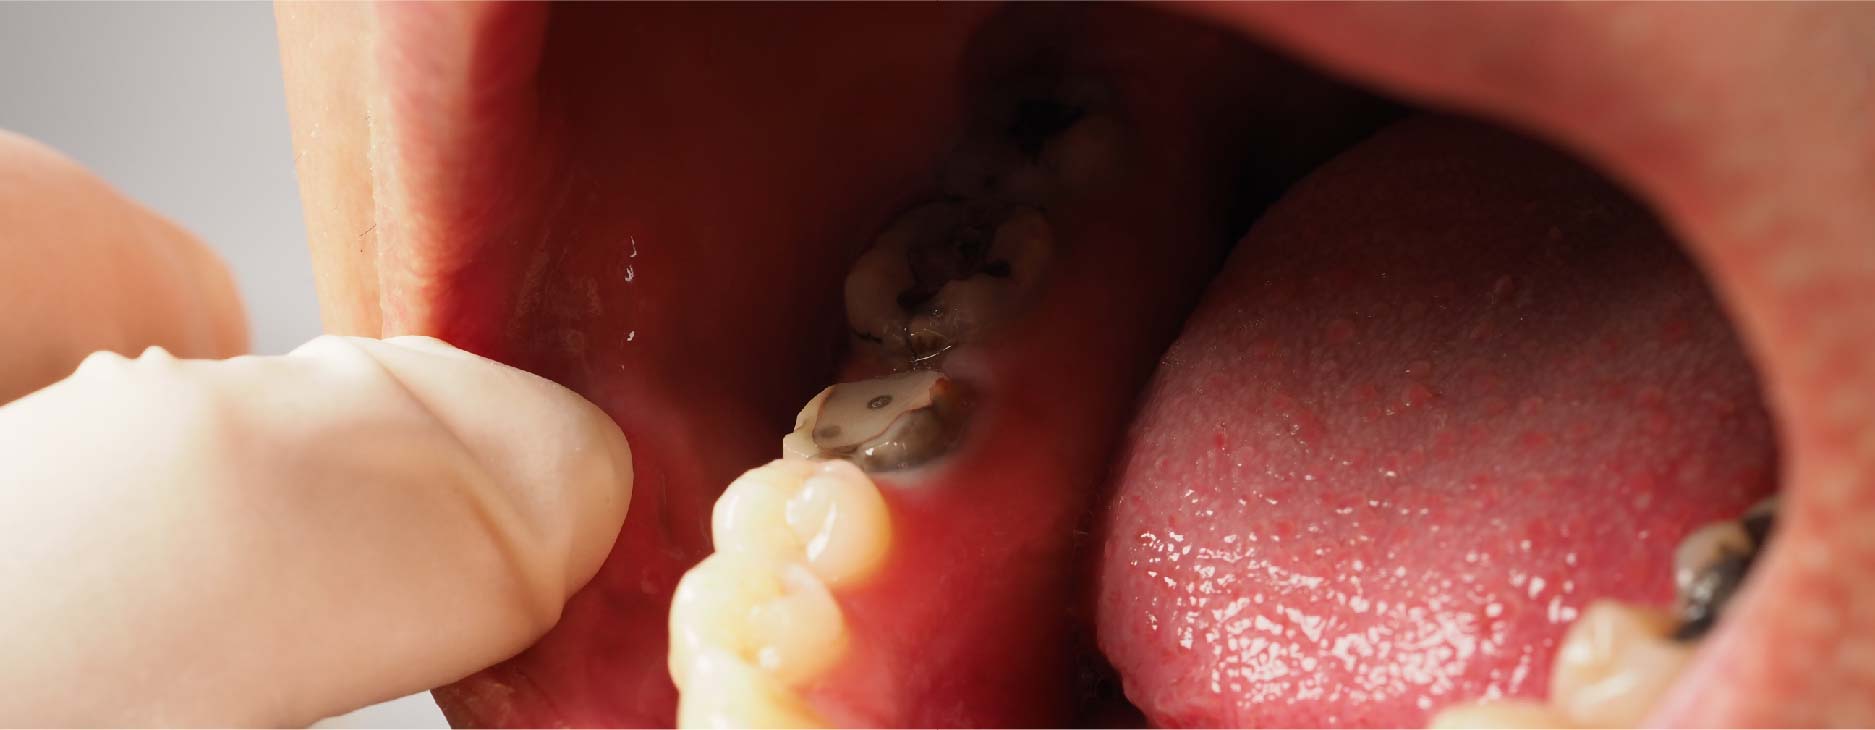 cyst around the impacted tooth